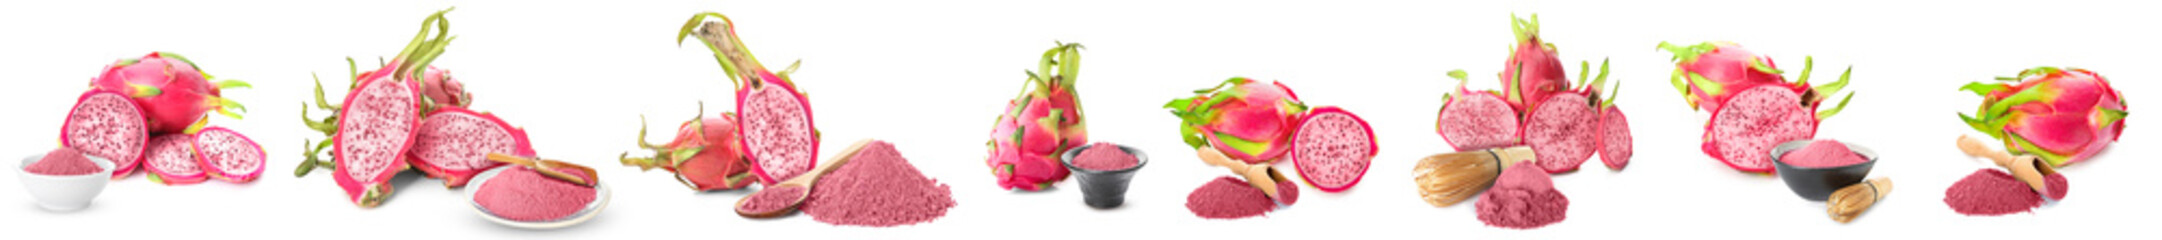 Collage of powdered pink matcha tea and fresh dragon fruit on white background